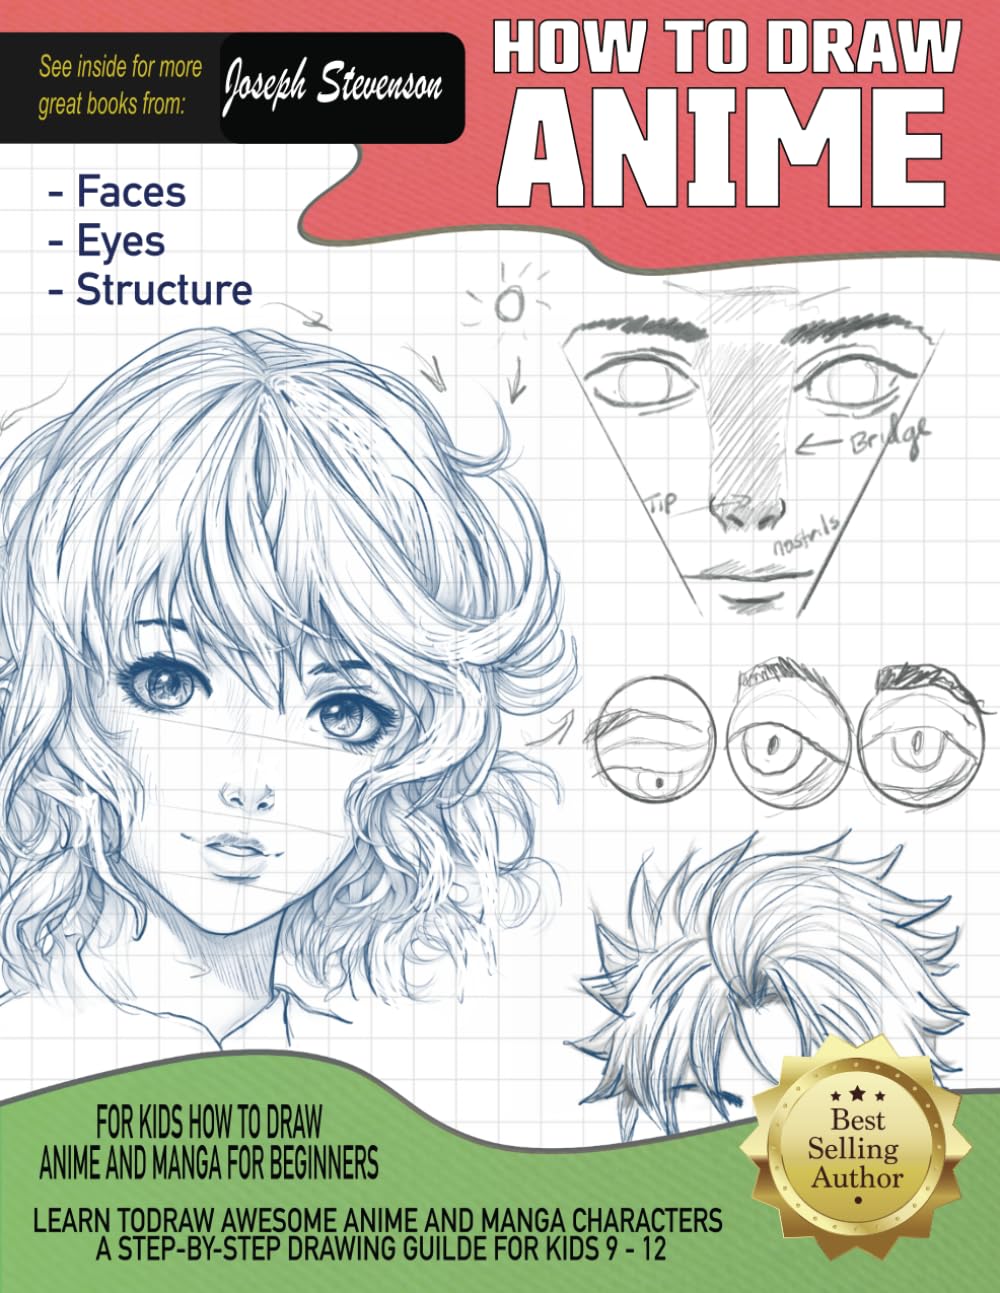 I'm a beginner at drawing and I want to draw manga, How should I